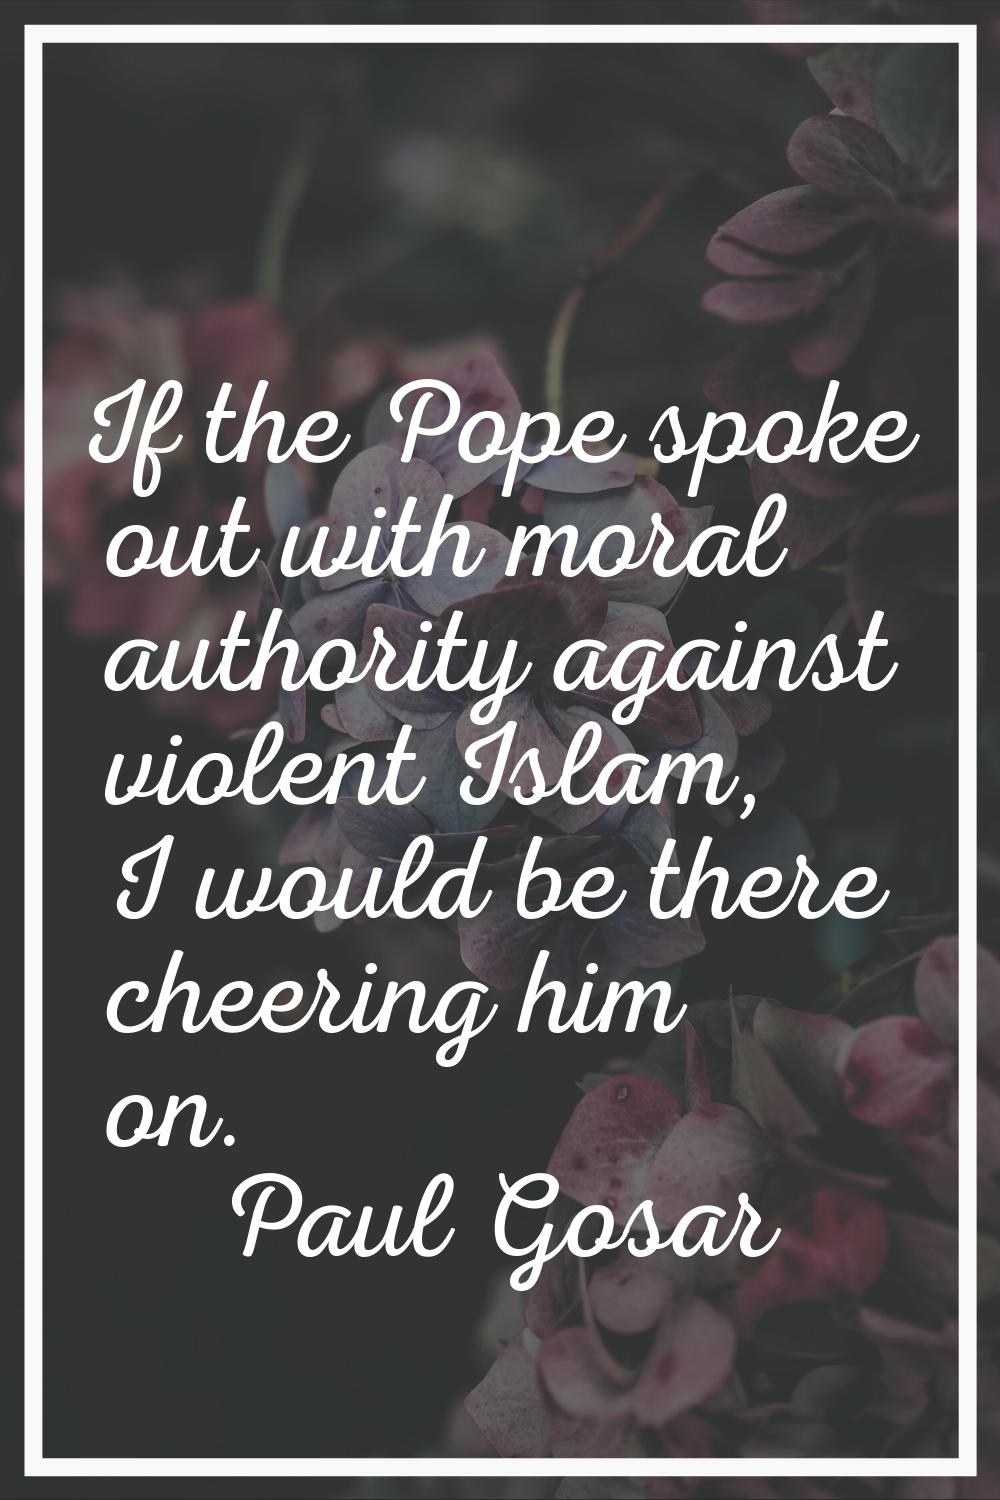 If the Pope spoke out with moral authority against violent Islam, I would be there cheering him on.